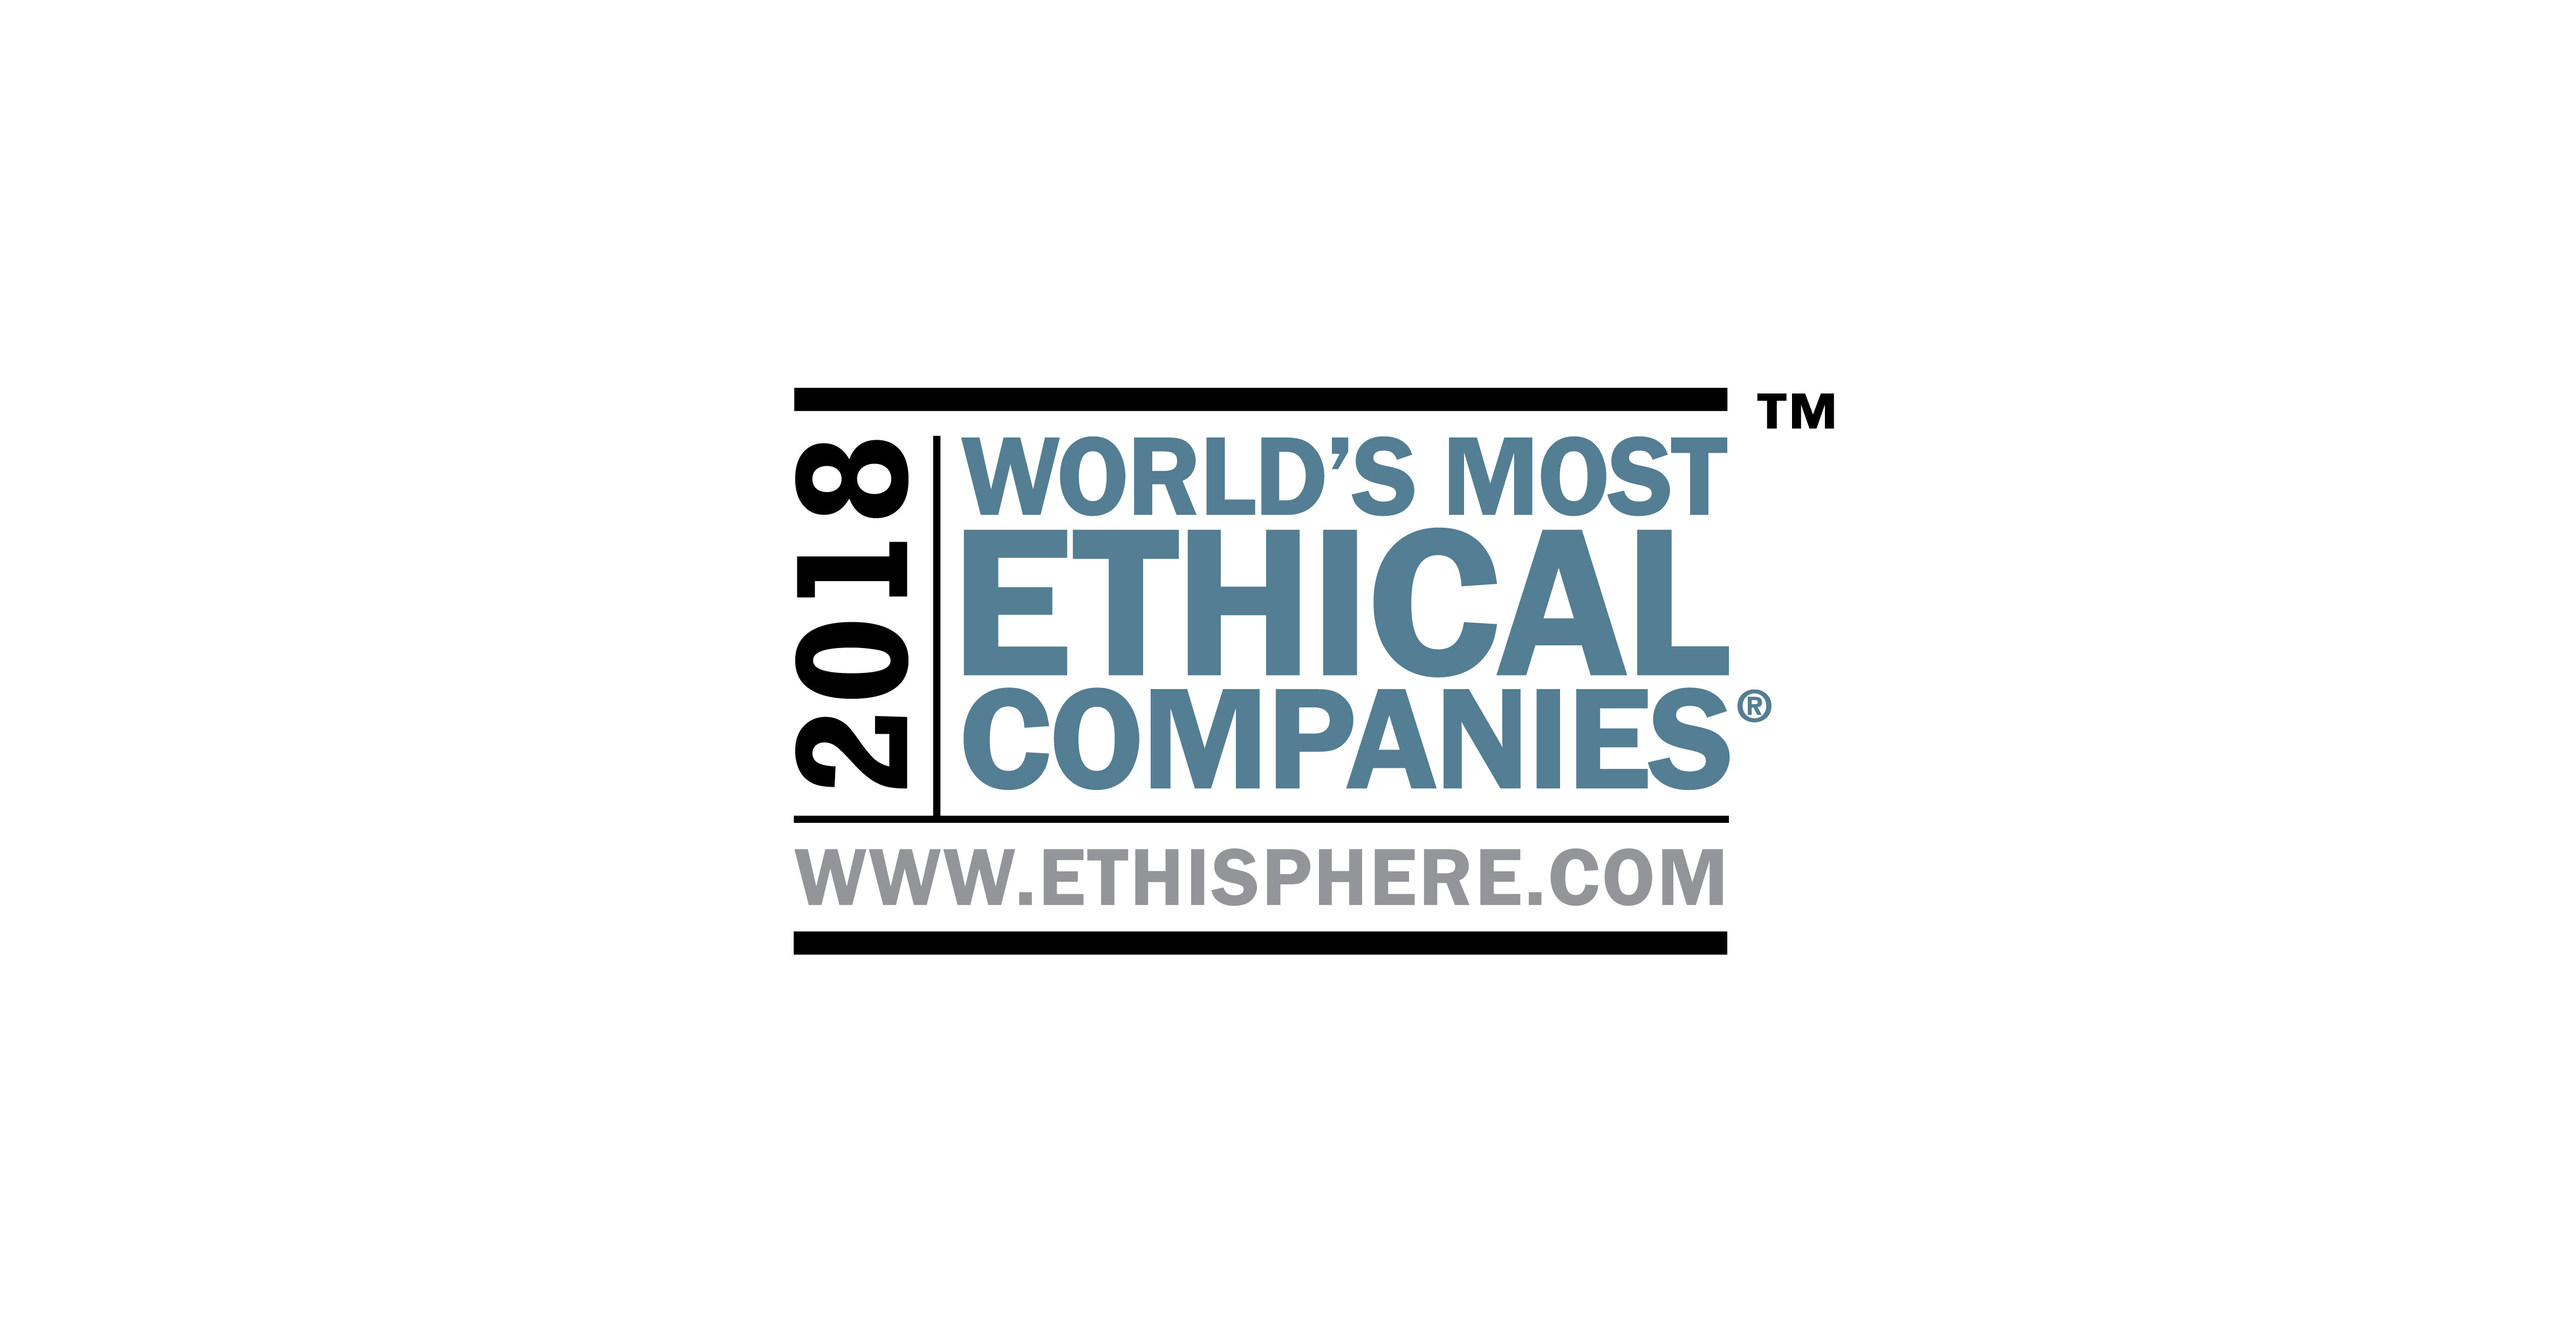 TE Connectivity named among World's Most Ethical Companies by